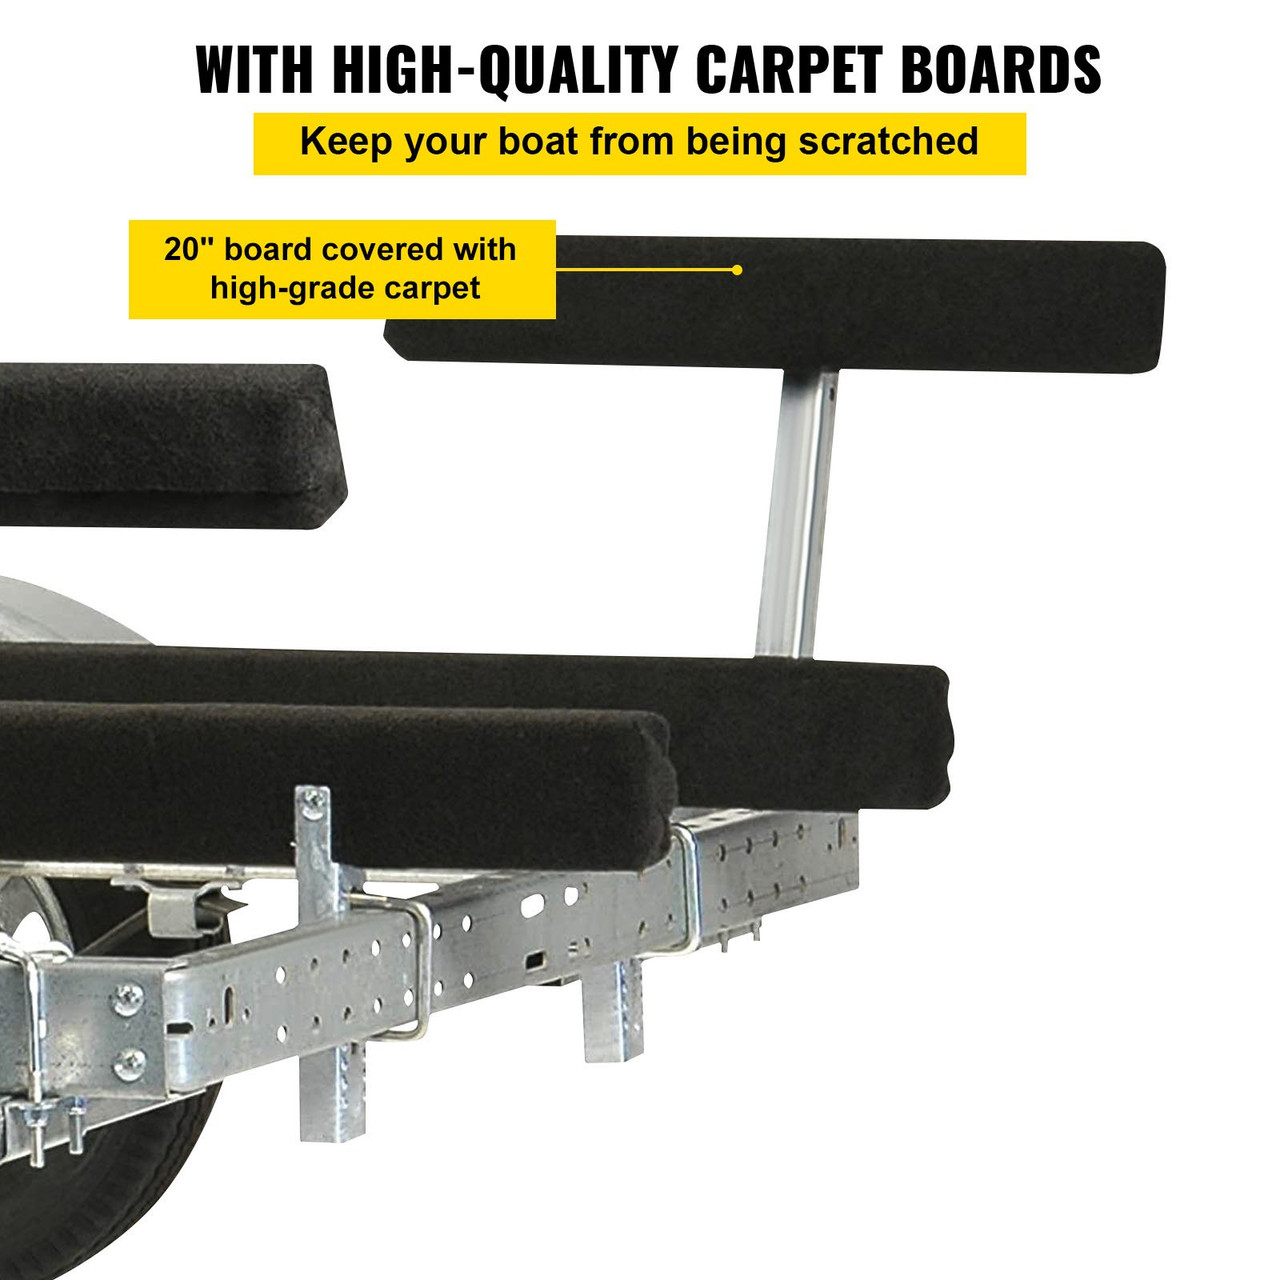 Short Bunk Guide-on 2PCS Boat Trailer Guides w/20" Carpet-padded Boards